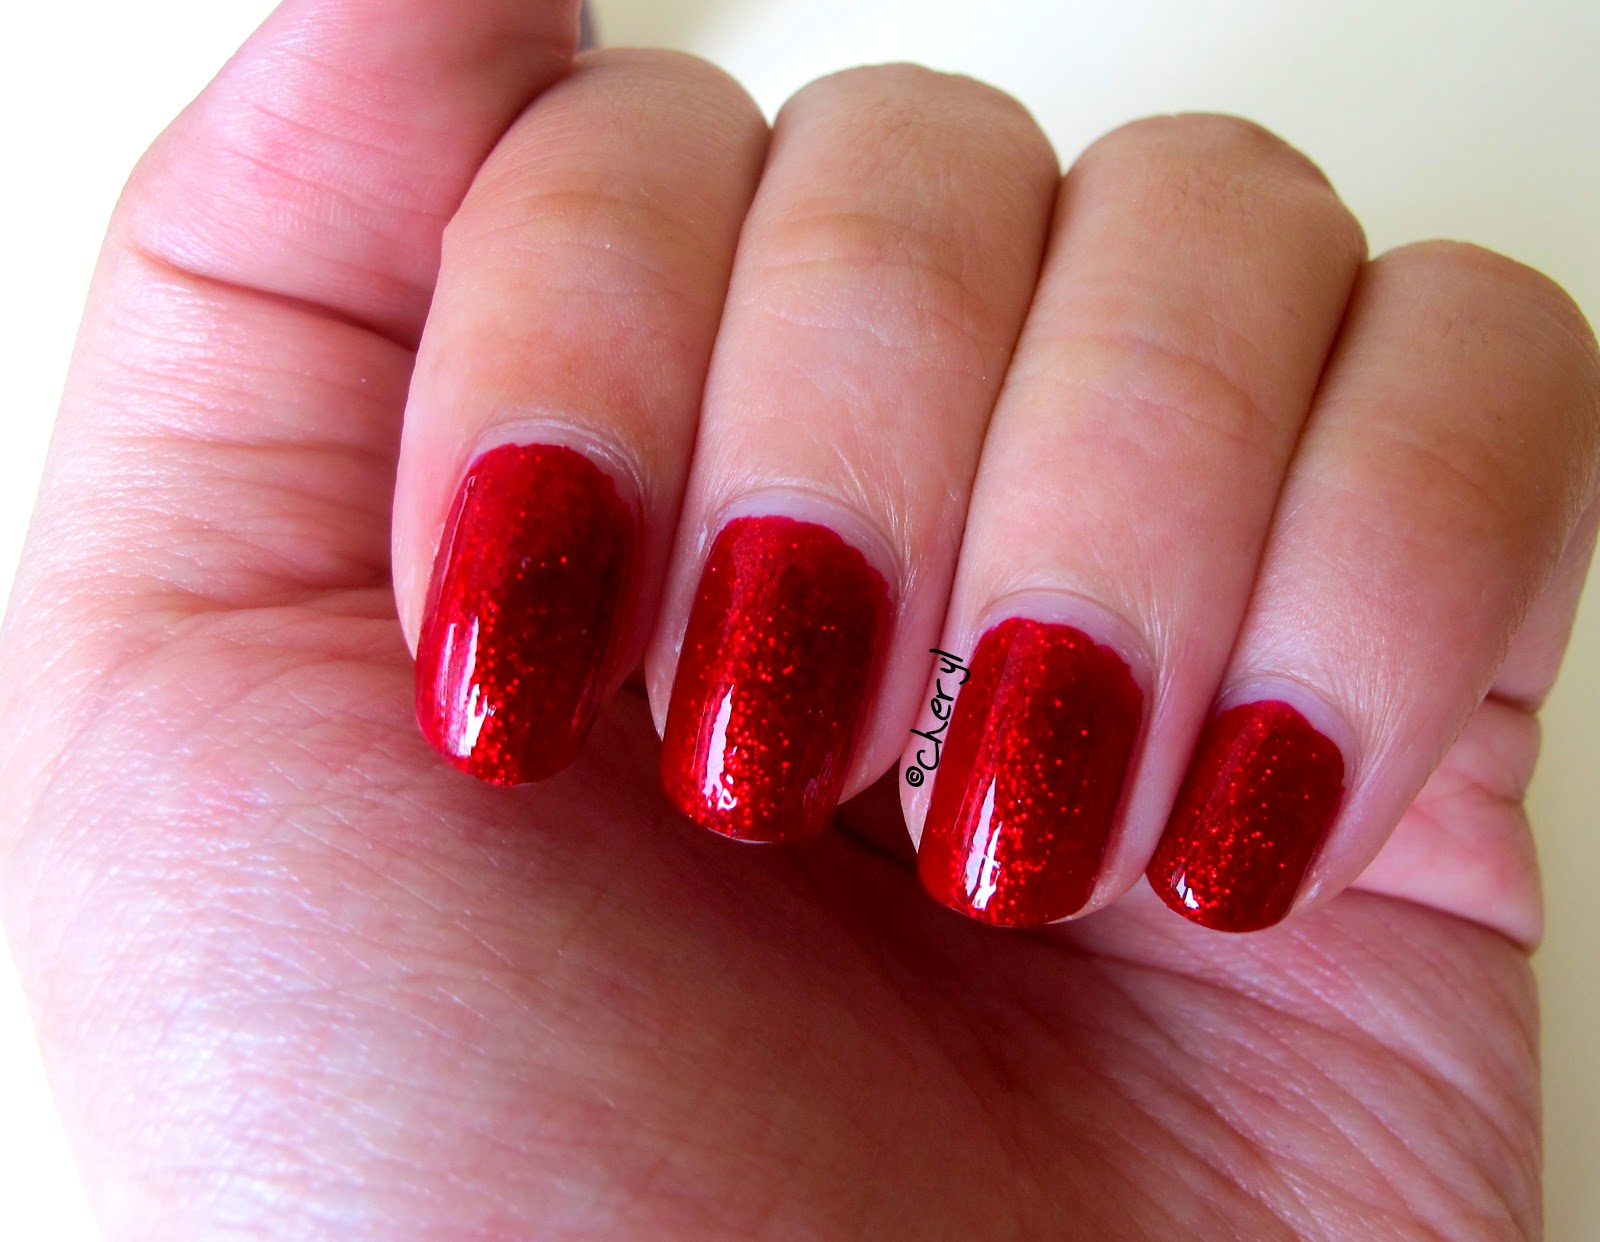 4. China Glaze Nail Lacquer in "Ruby Pumps" - wide 3